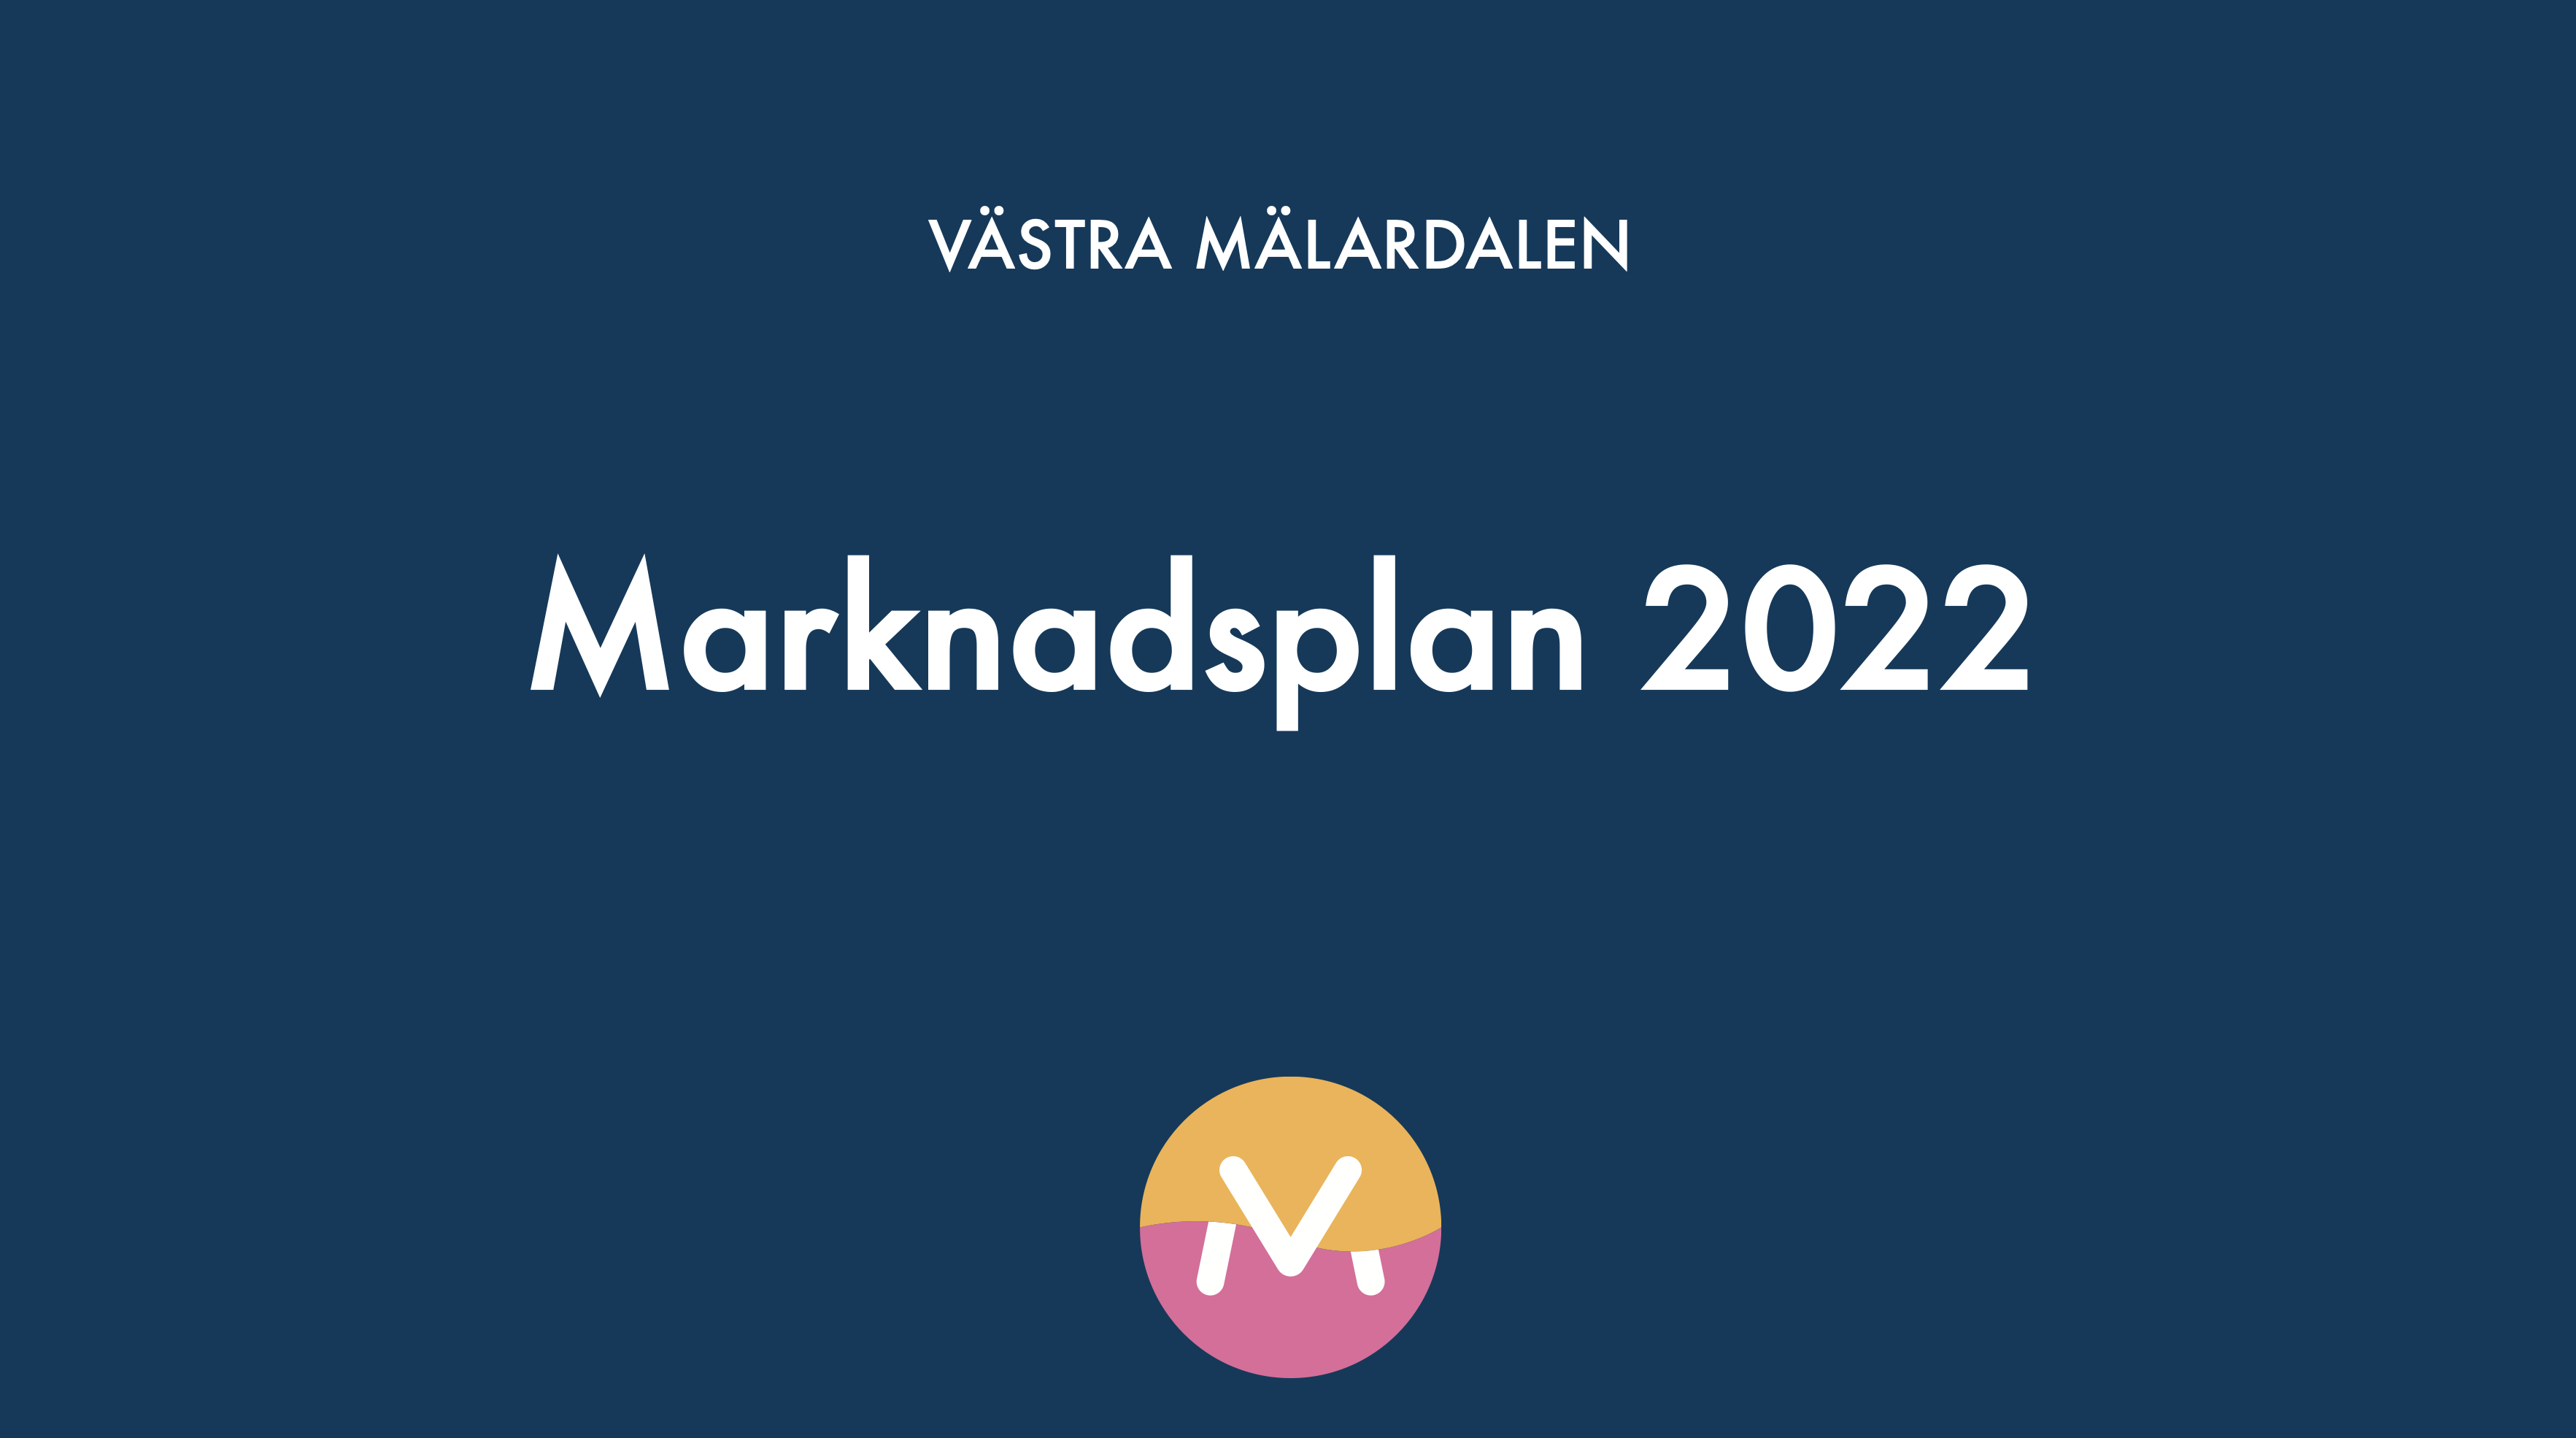 Marknadsplan in the making